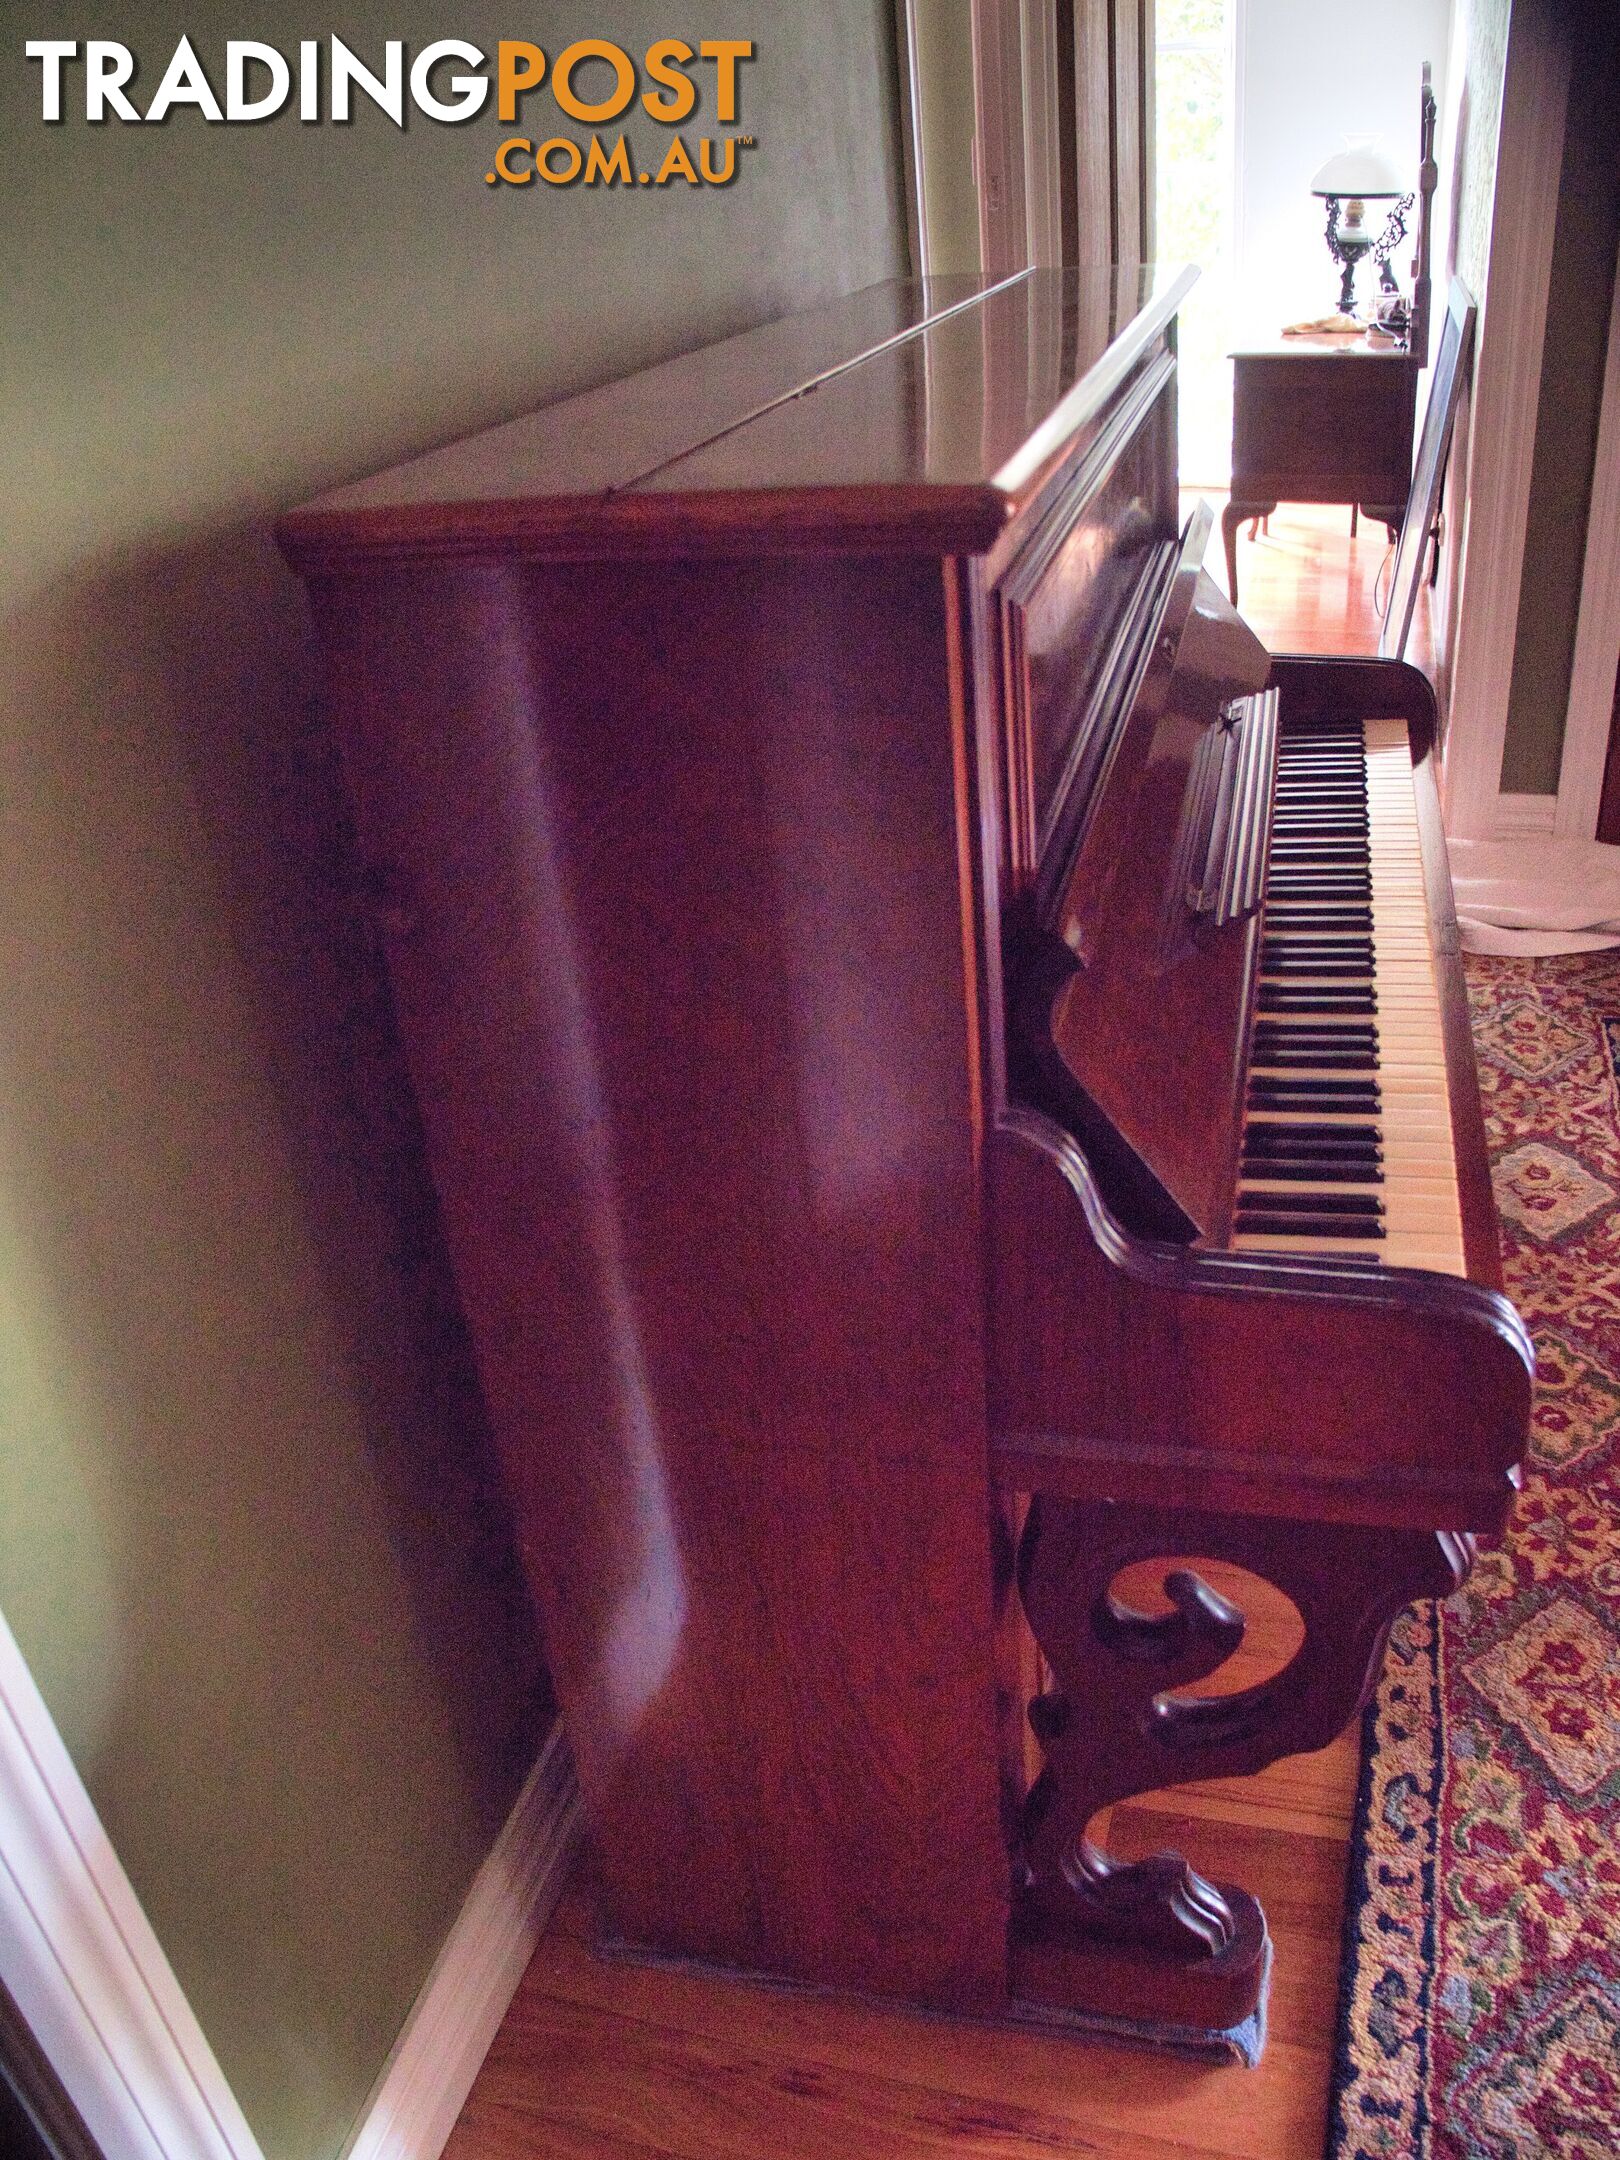 Piano Vintage over 100 years old